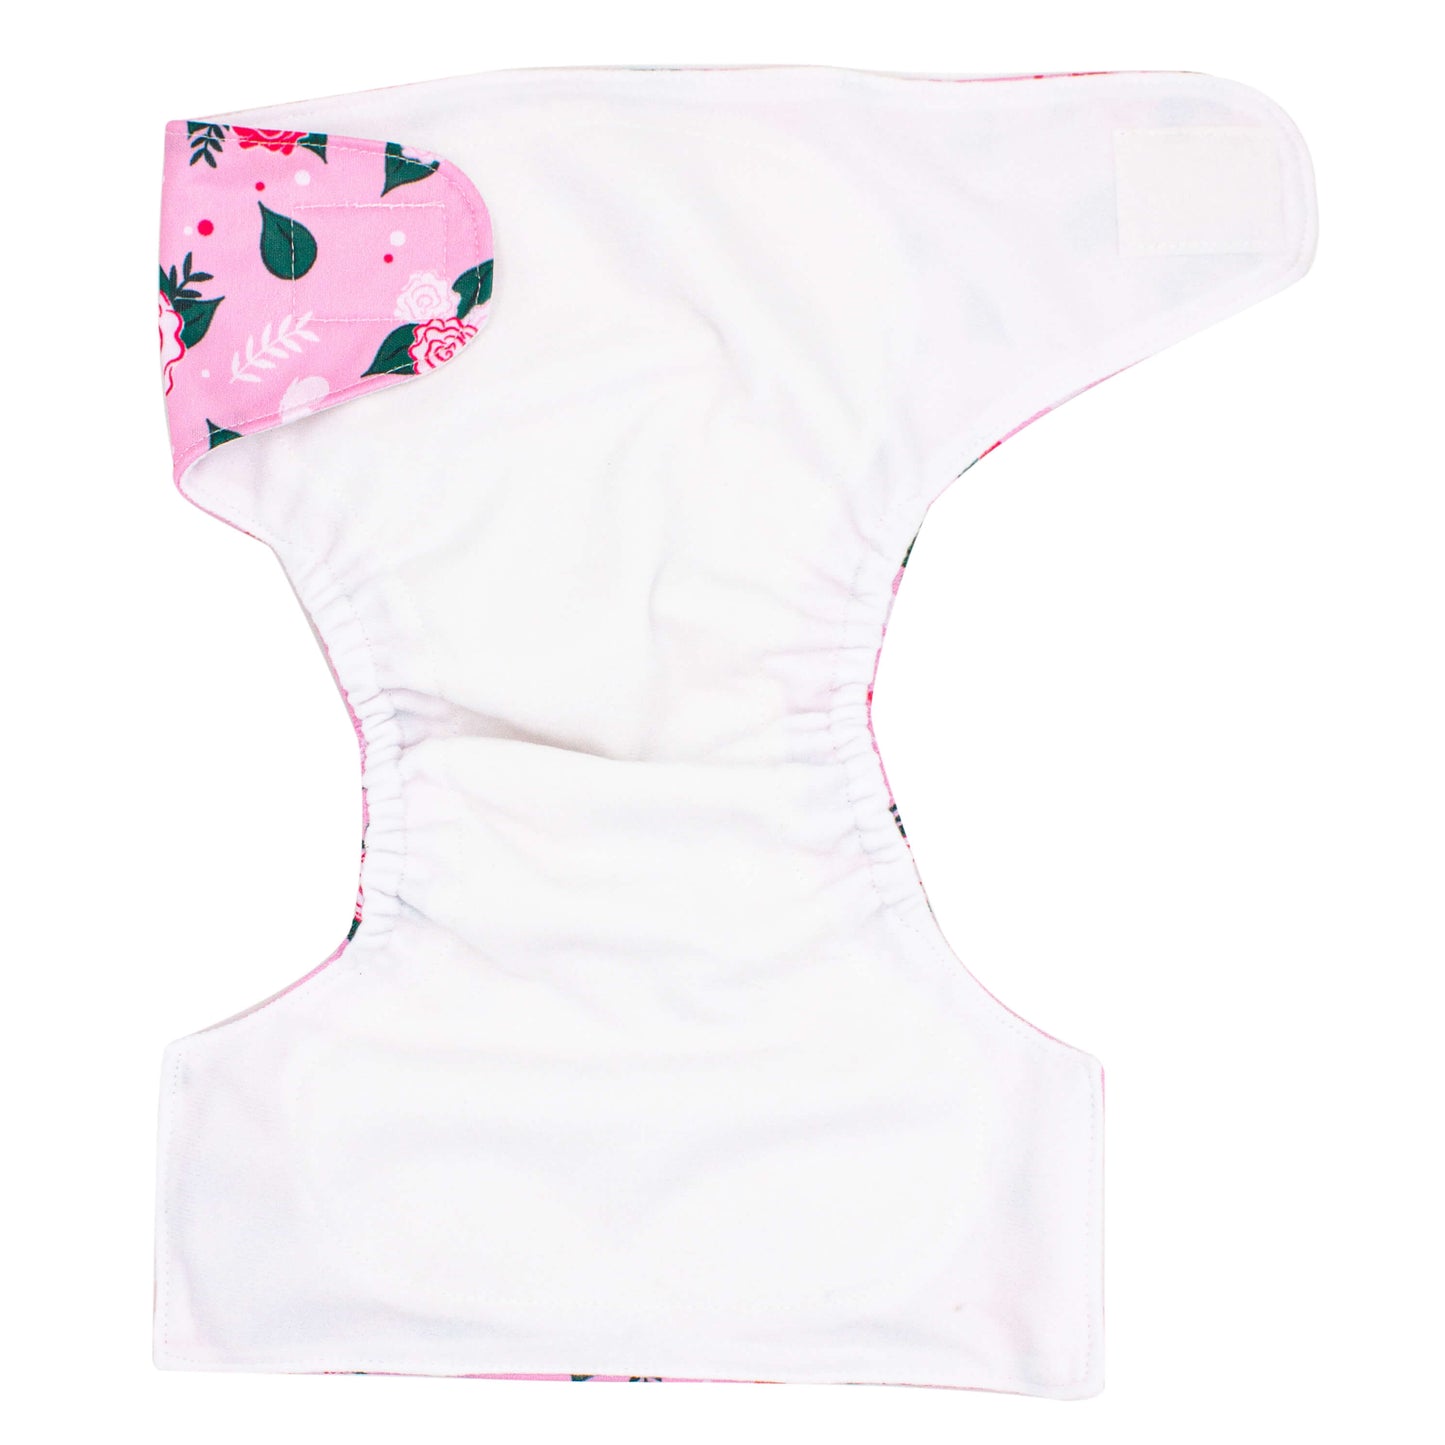 Couche lavable 8-12 mois - Roses Babycalin - BB Malin